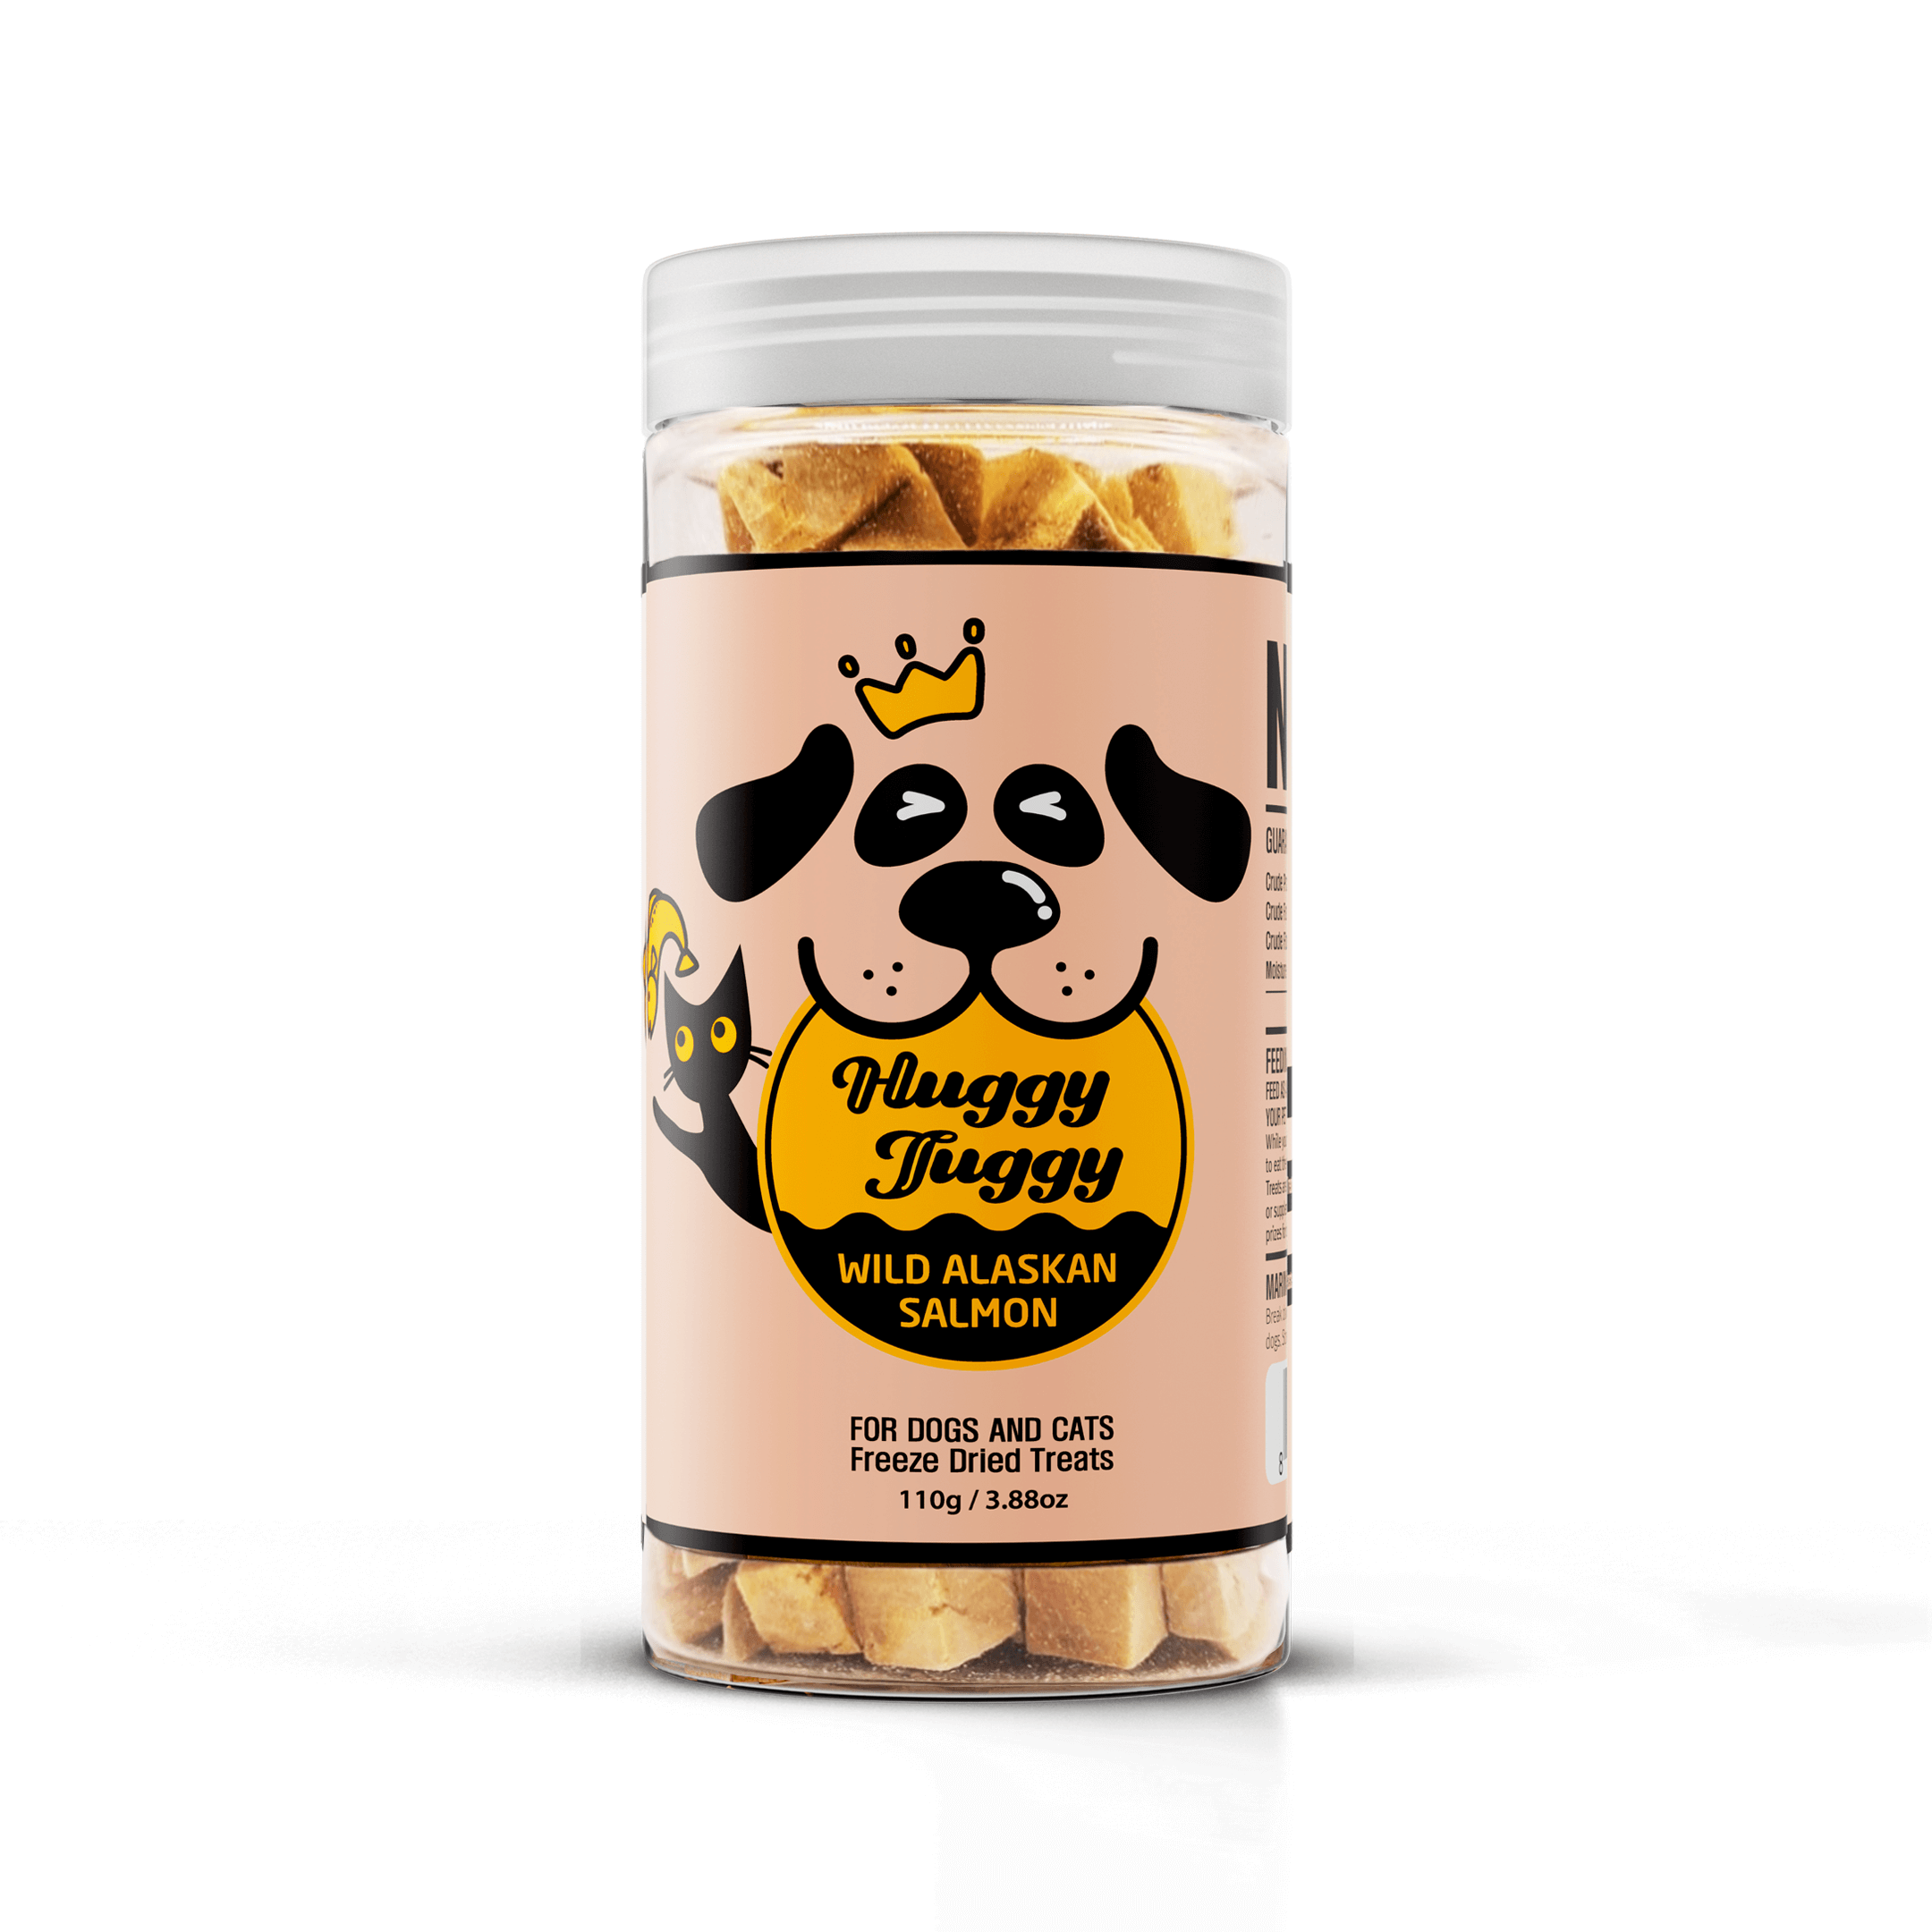 Huggy Tuggy Freeze-Dried Wild Alaskan Salmon Treats for Dogs and Cats - Natural Single Ingredient Pet Food, High Protein - No Fillers, Preservatives, or Additives - 3.88 Oz